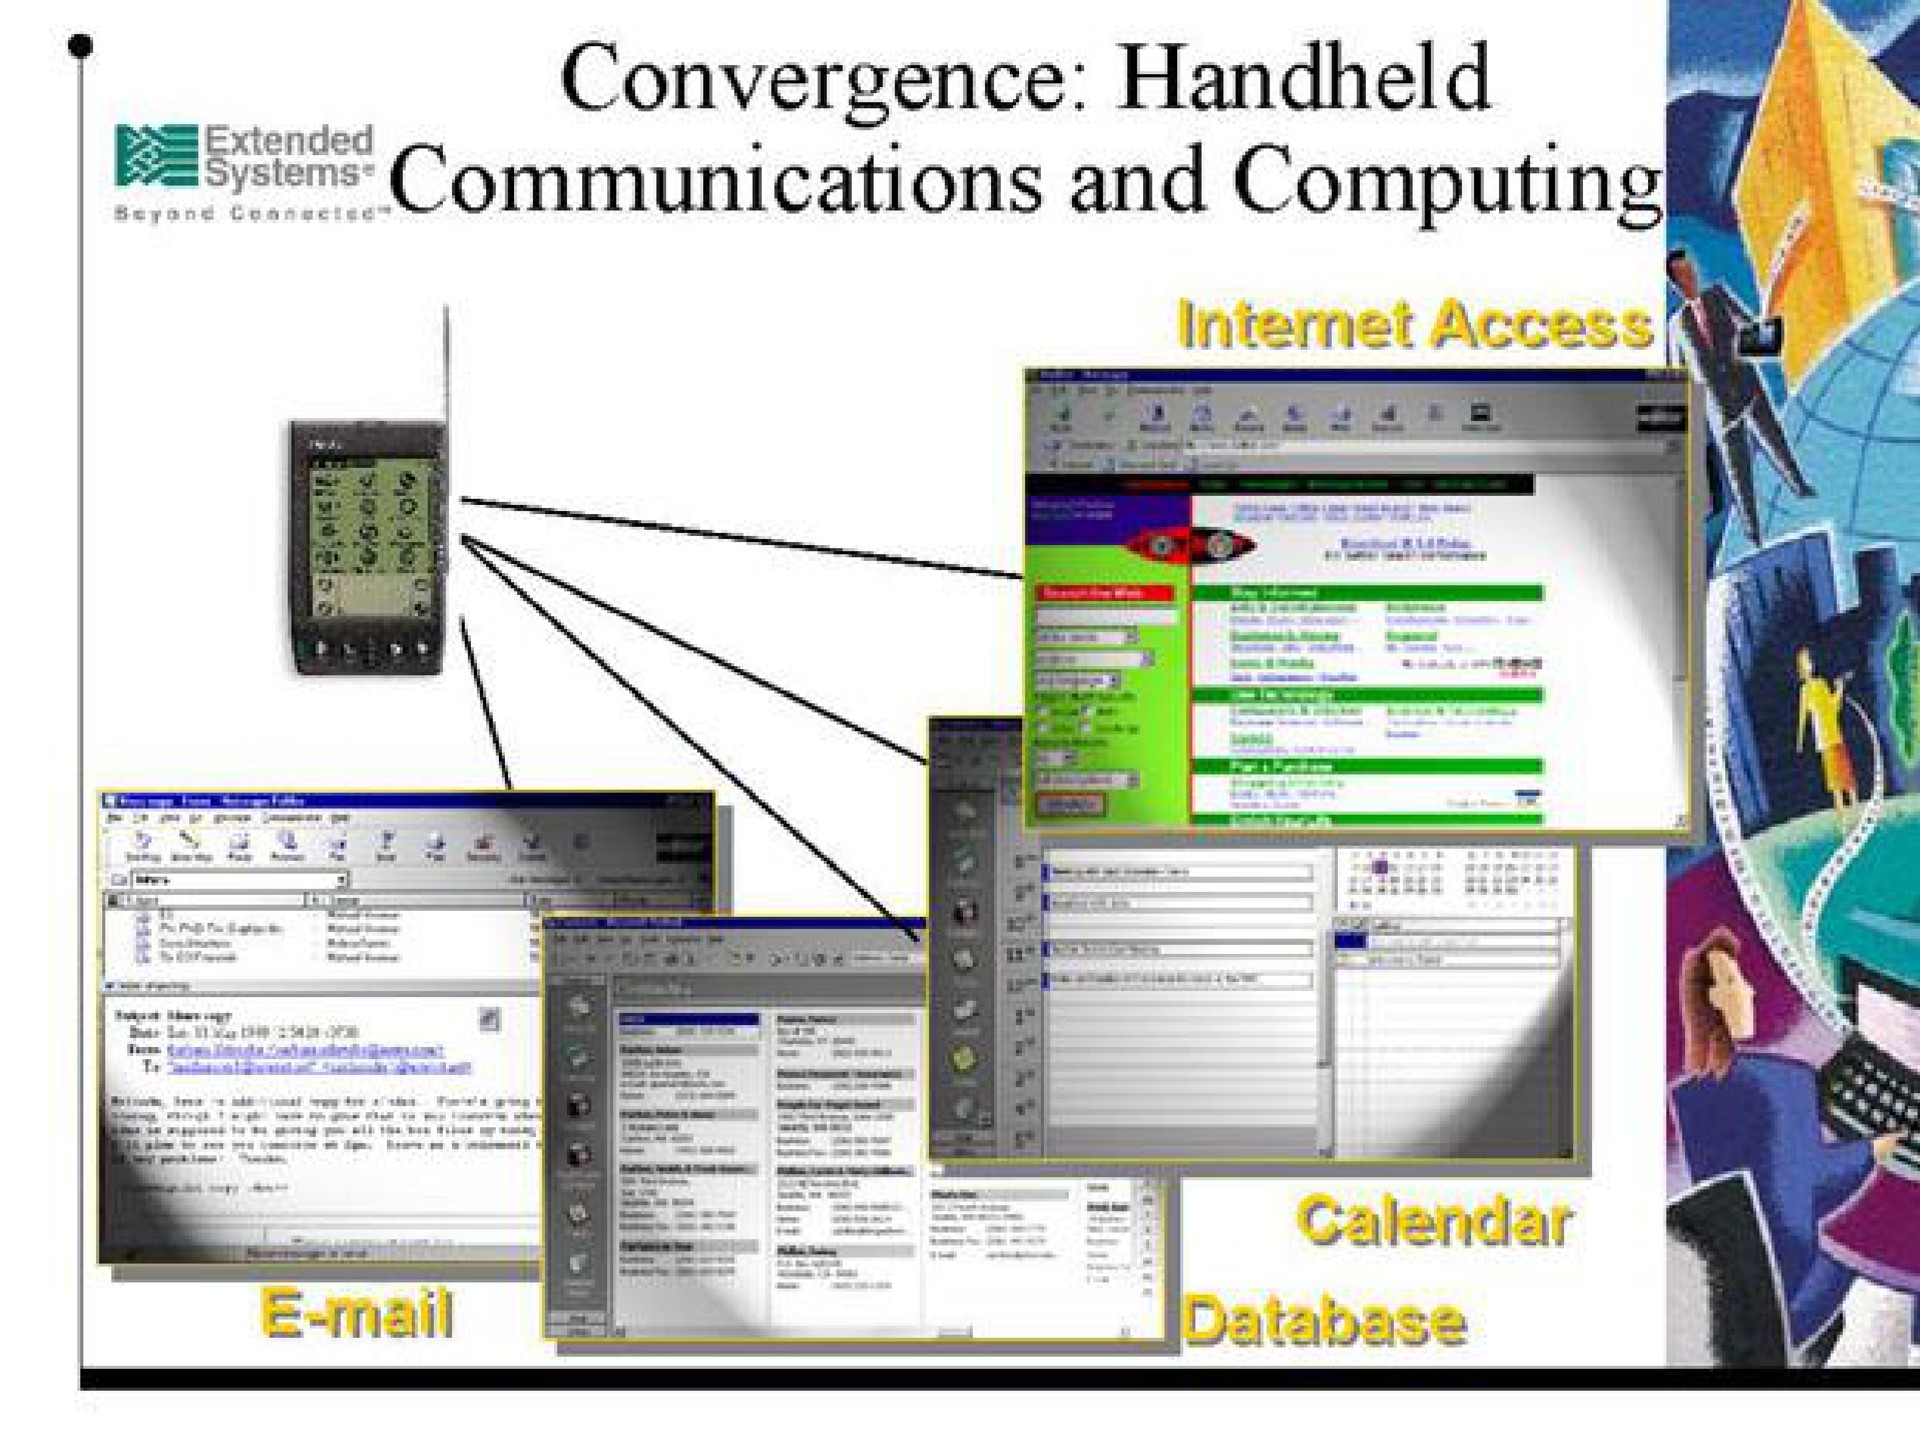 sis communications and as convergence | Extended Systems